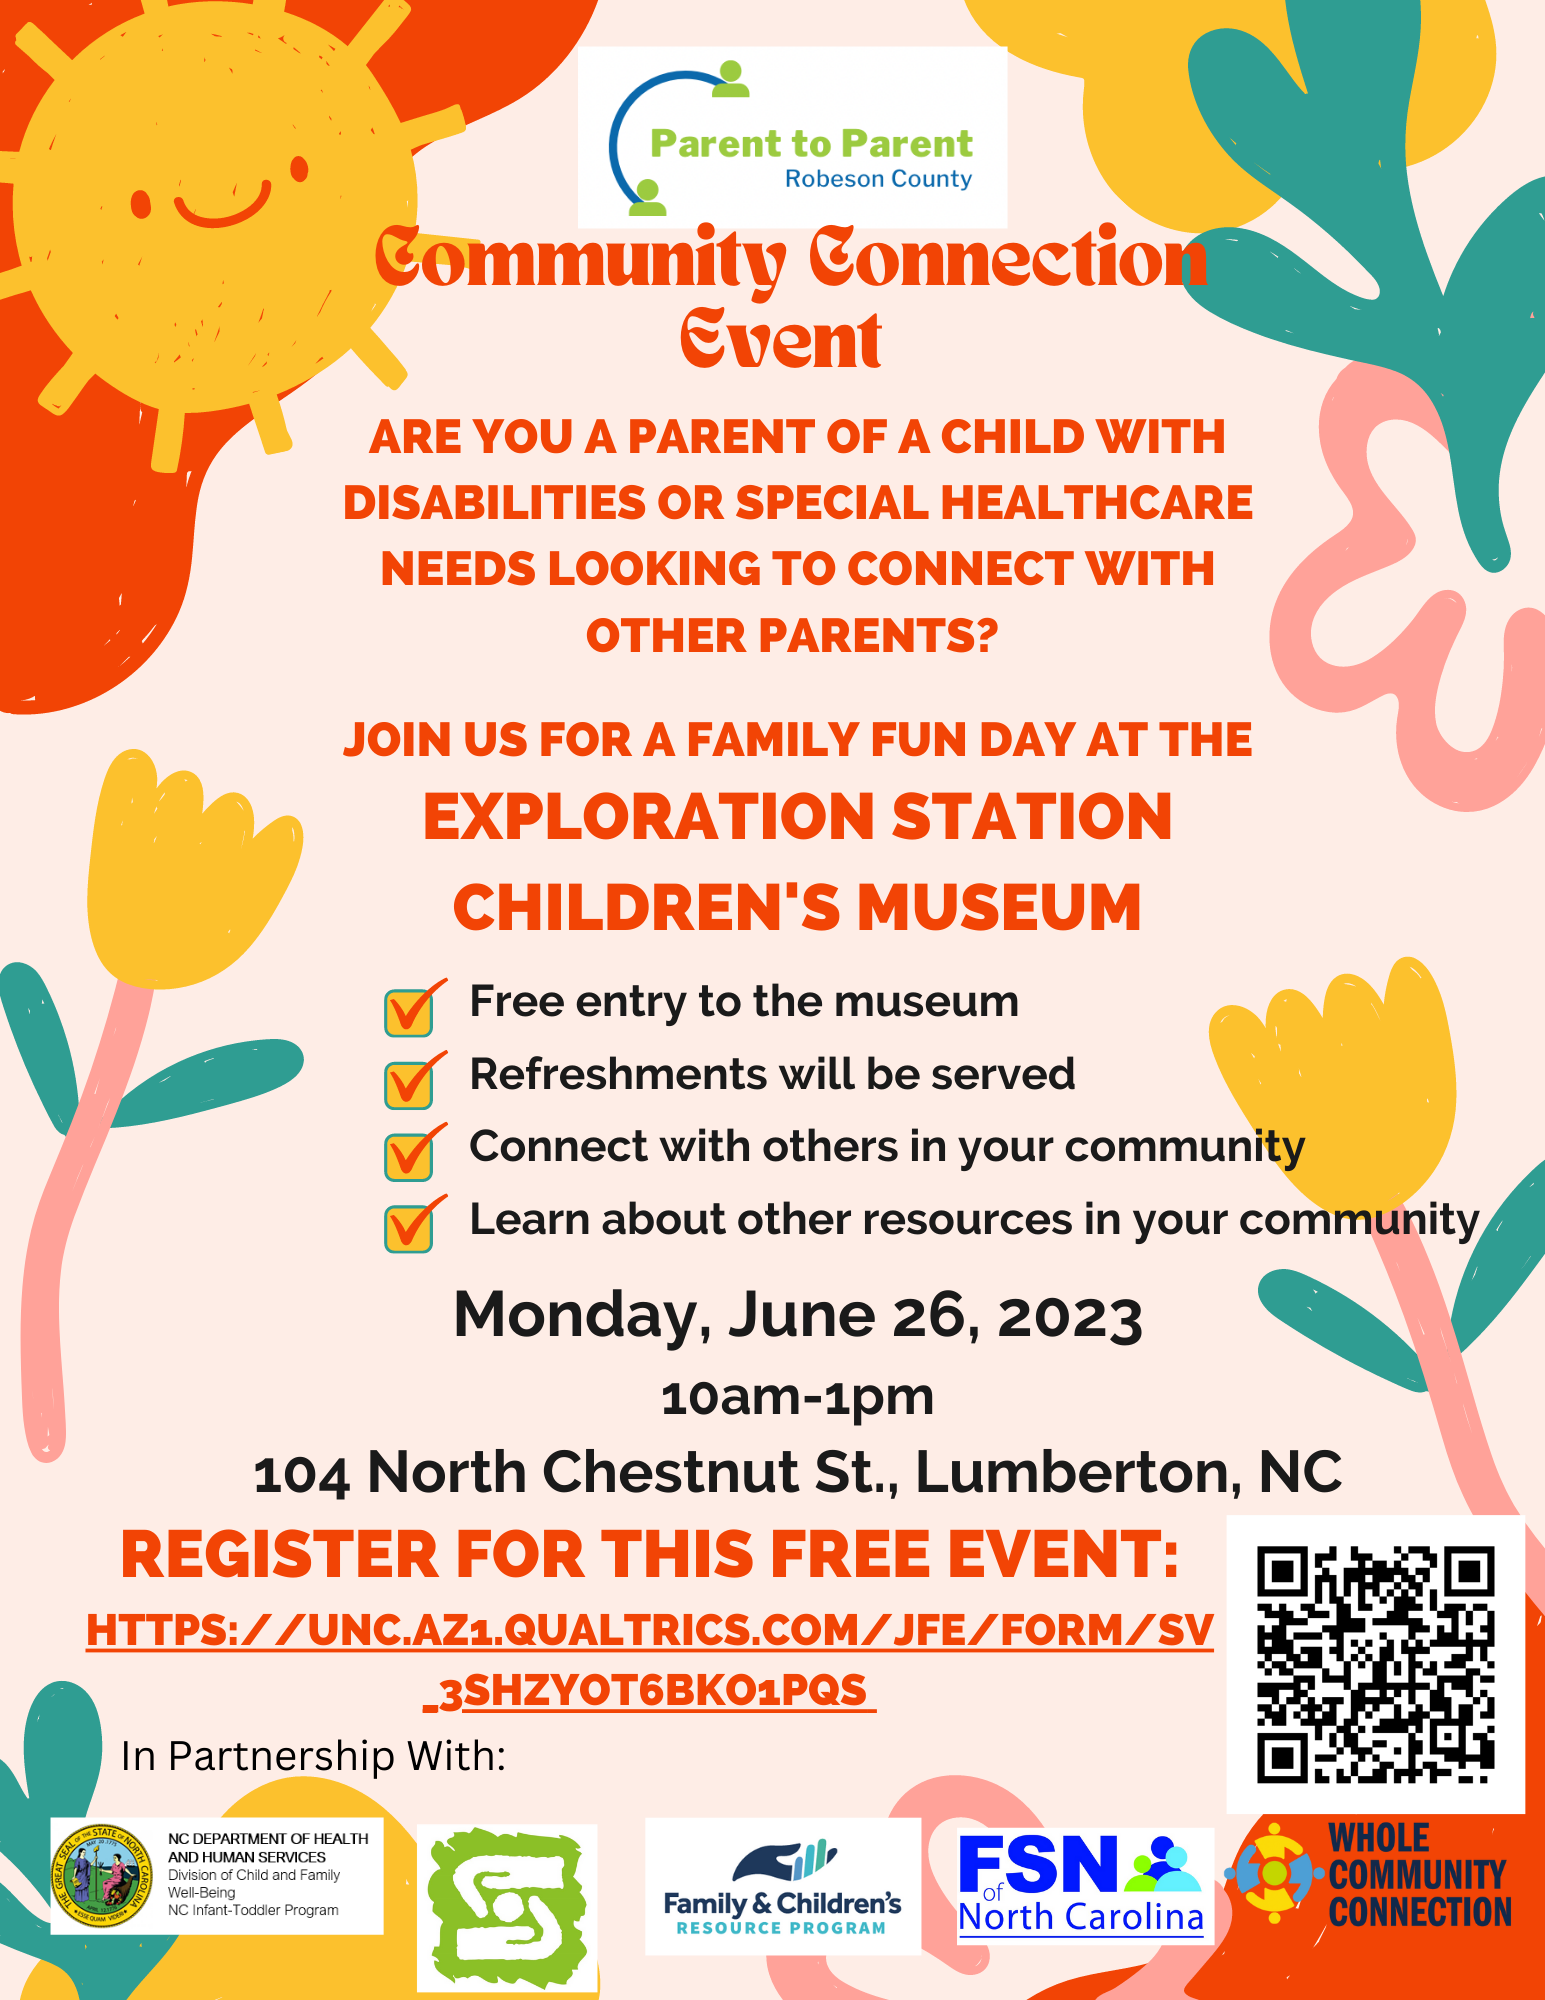 Free Community Connection Event for families with children with disabilities or special healthcare needs on June 26 from 10a-1pm at Exploration Station Children's Museum 104 North Chestnut Street in Lumberton, NC